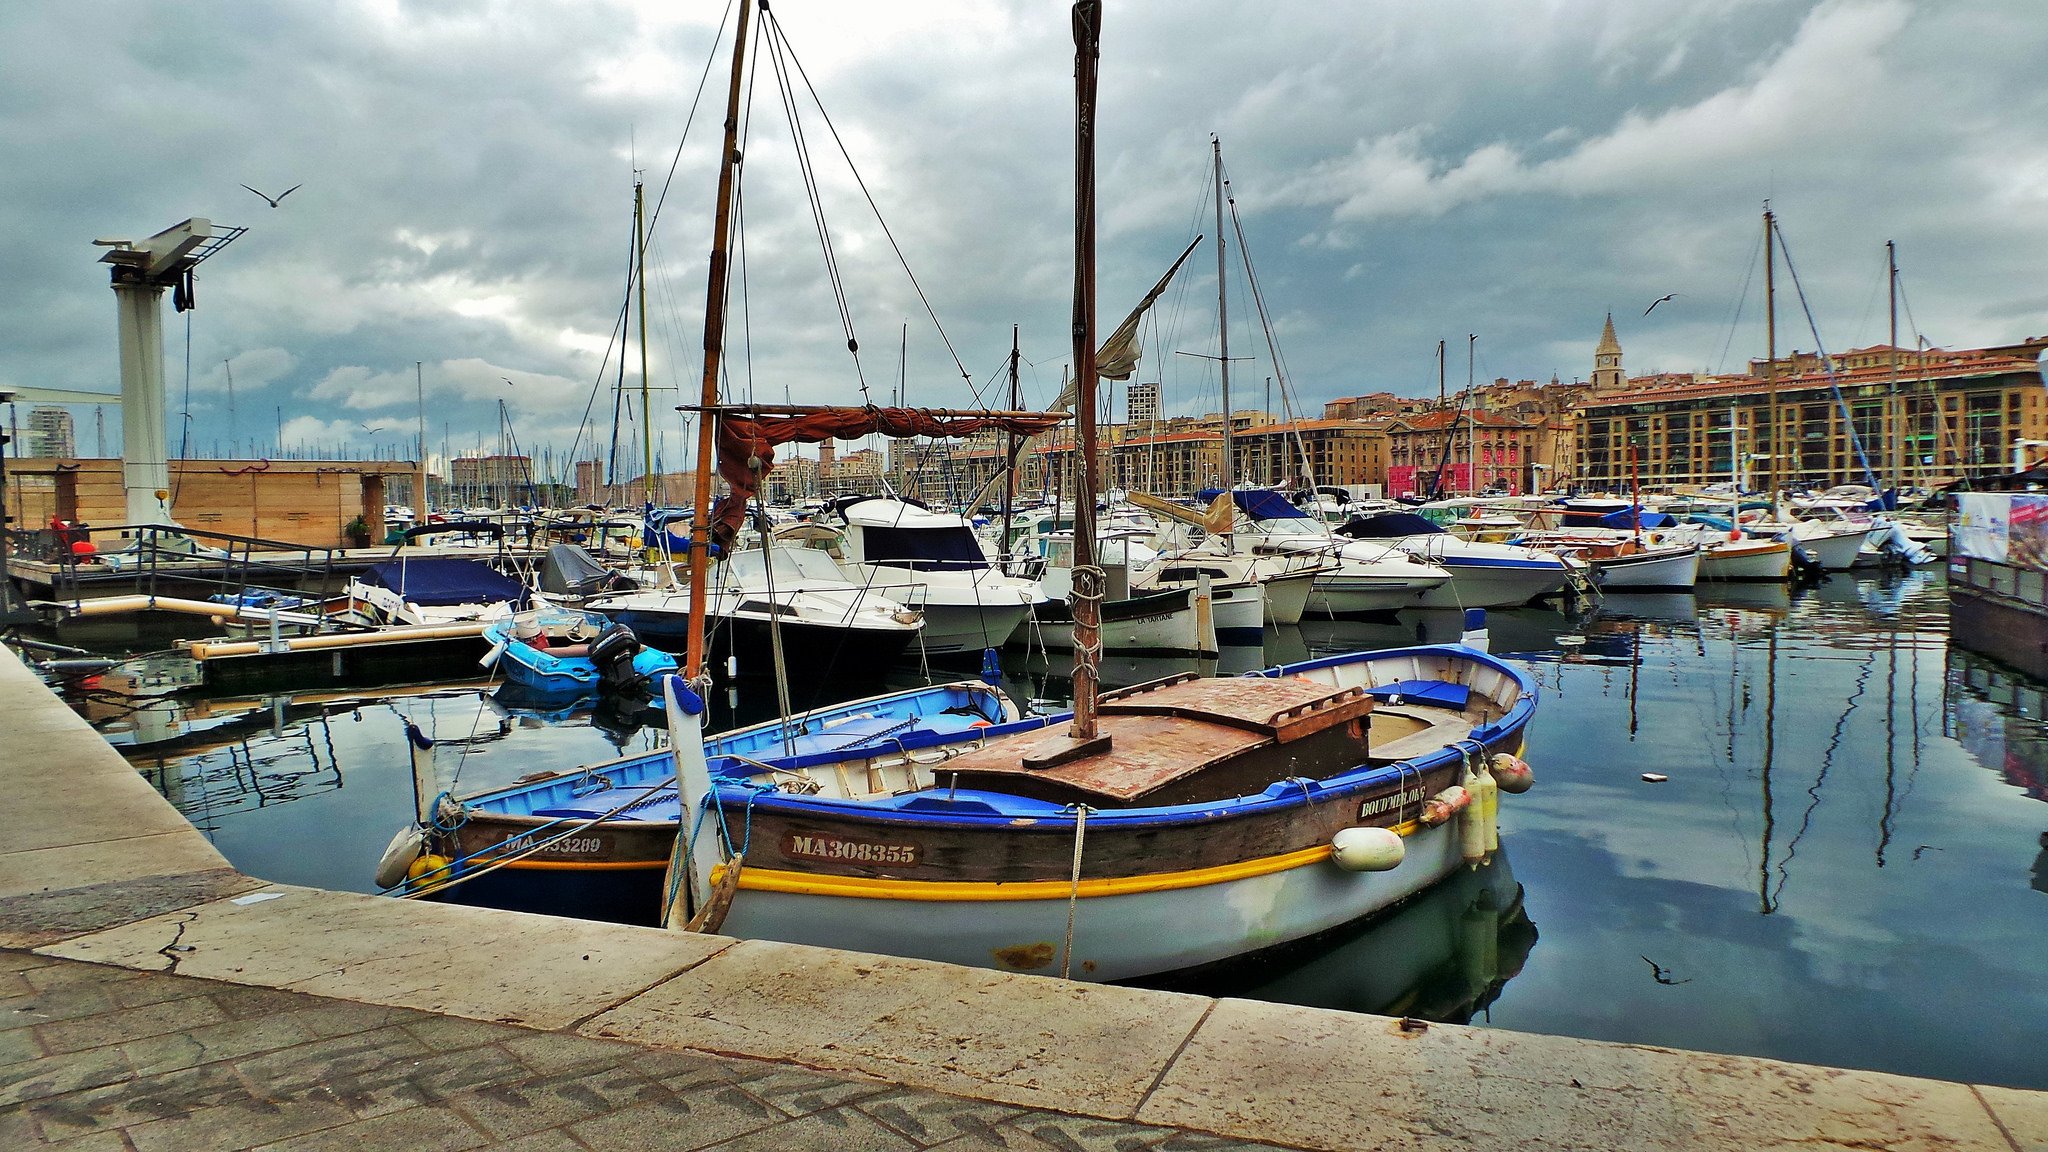 marseille, France, Provence, 13, Cities, Monuments, Panorama, Panoramic, Urban, Architecture, Port, Sea, Vieux, Harbor Wallpaper